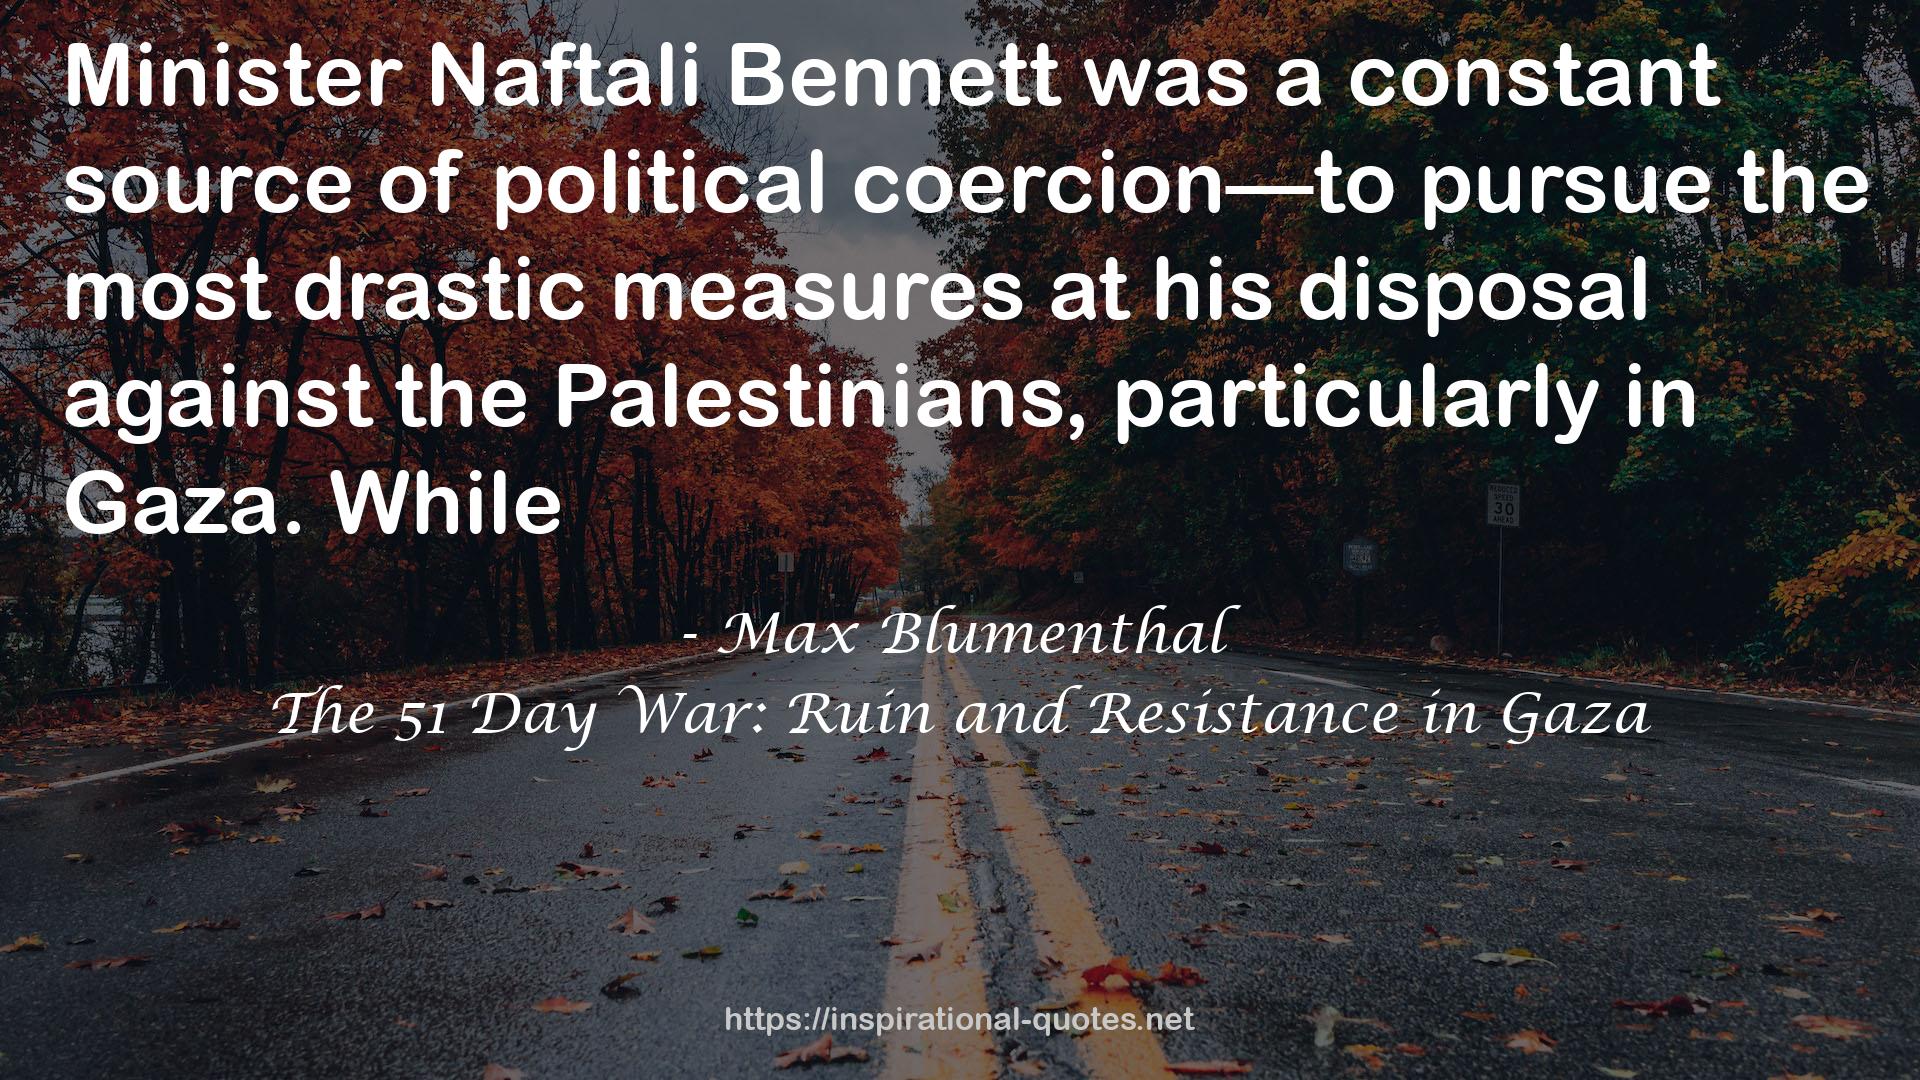 The 51 Day War: Ruin and Resistance in Gaza QUOTES